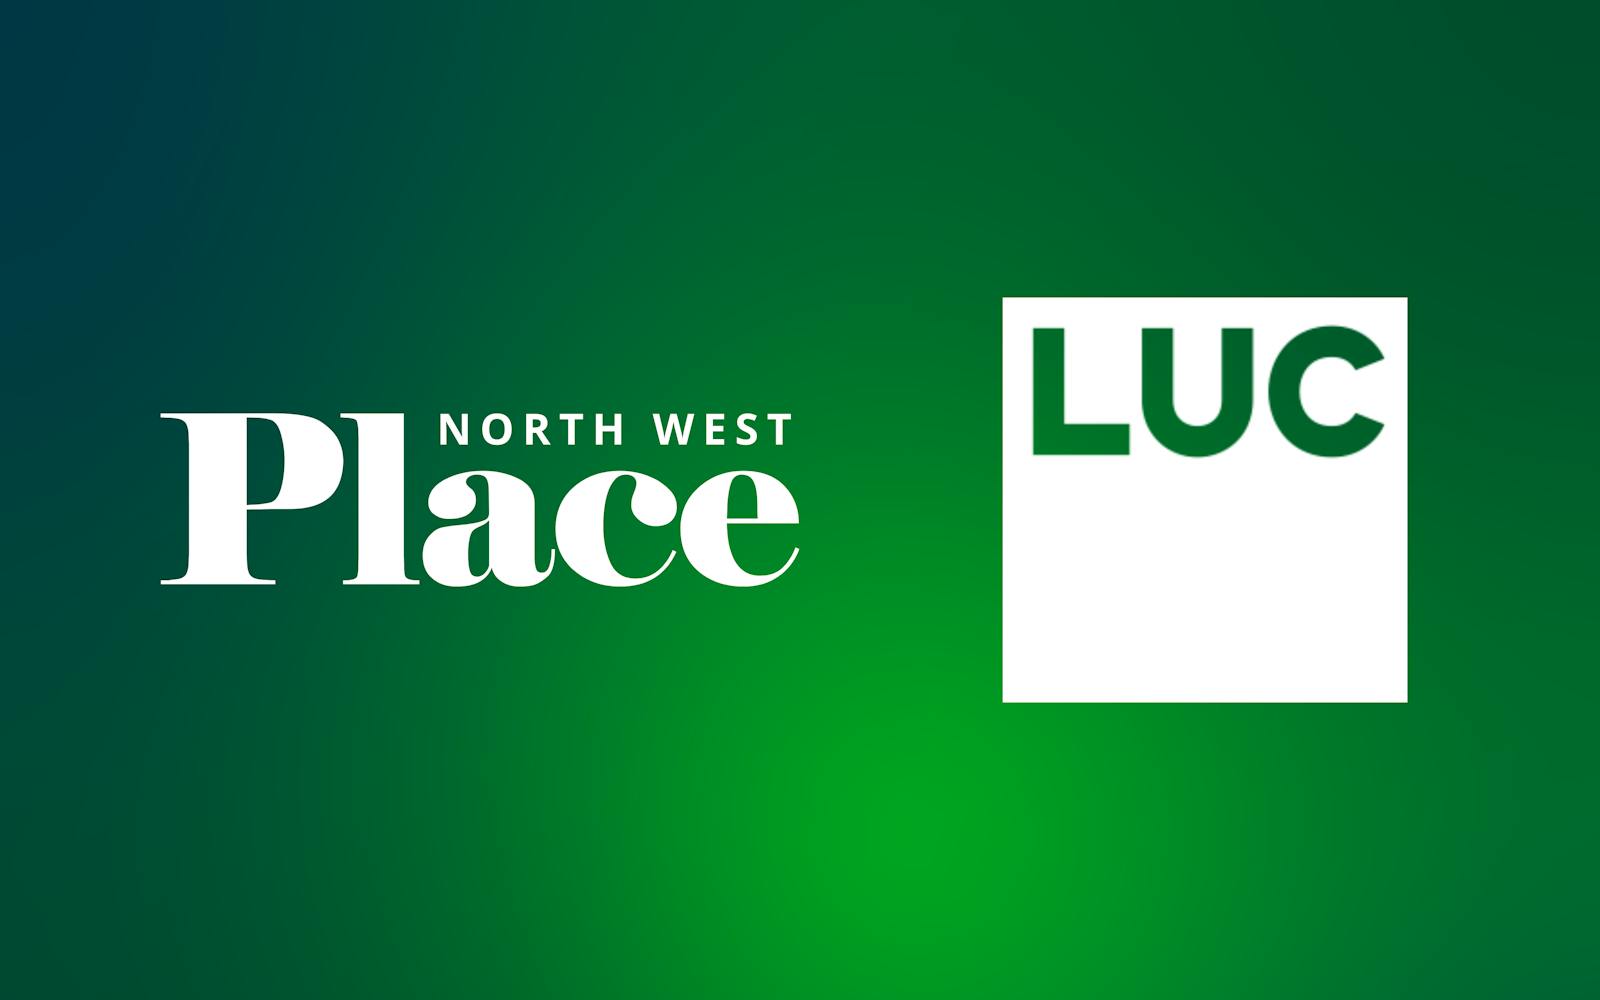 Place North West logo and LUC logo